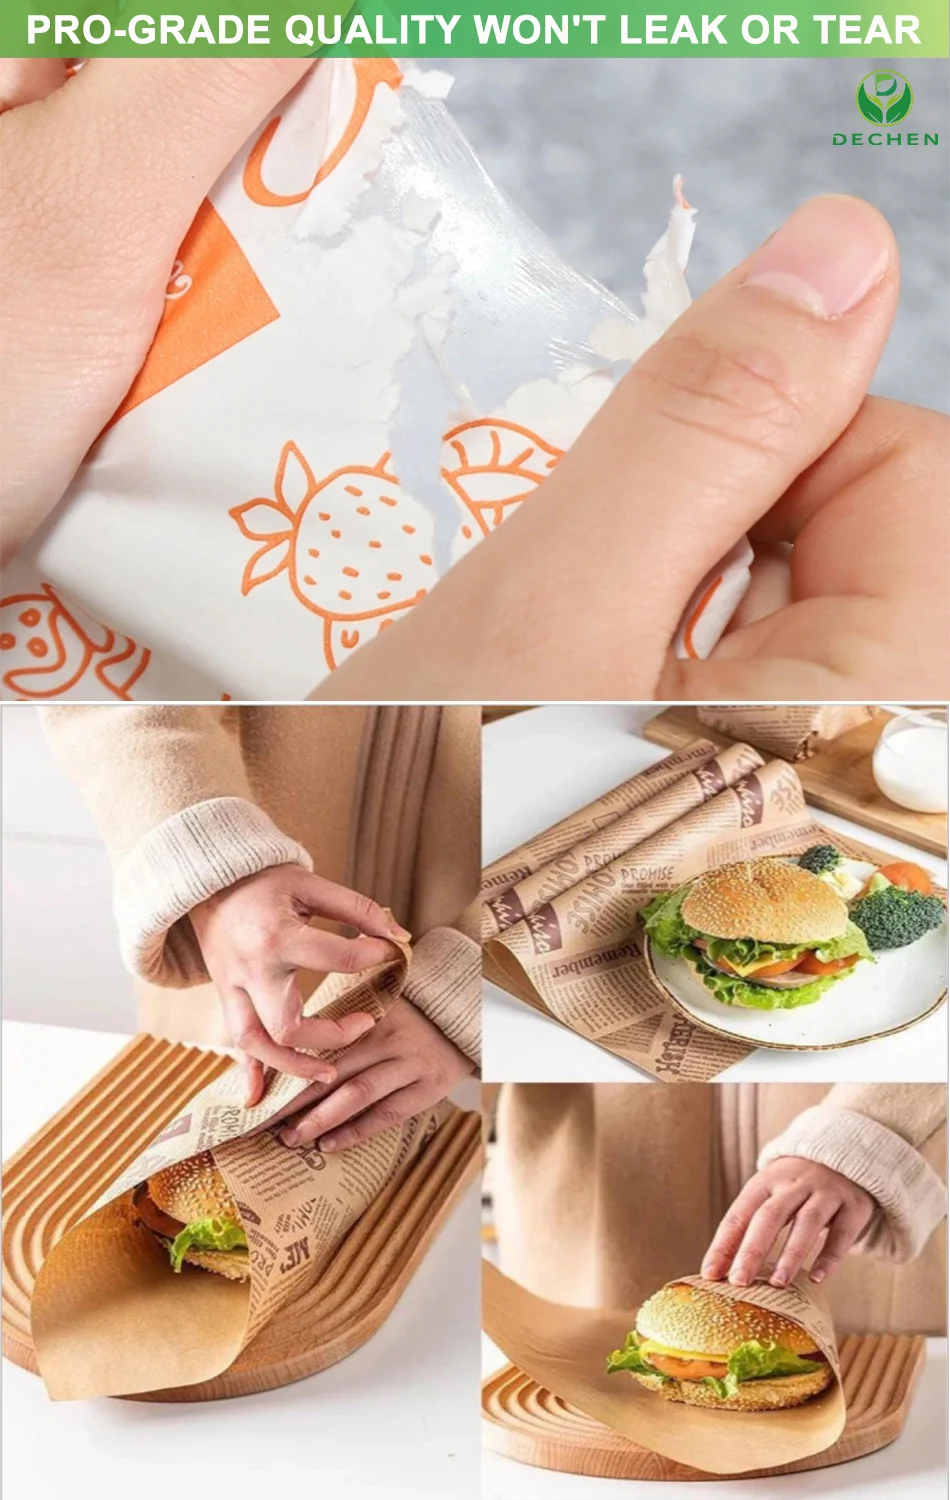 wrapping sandwiches in wax paper tissue for food custom printed service